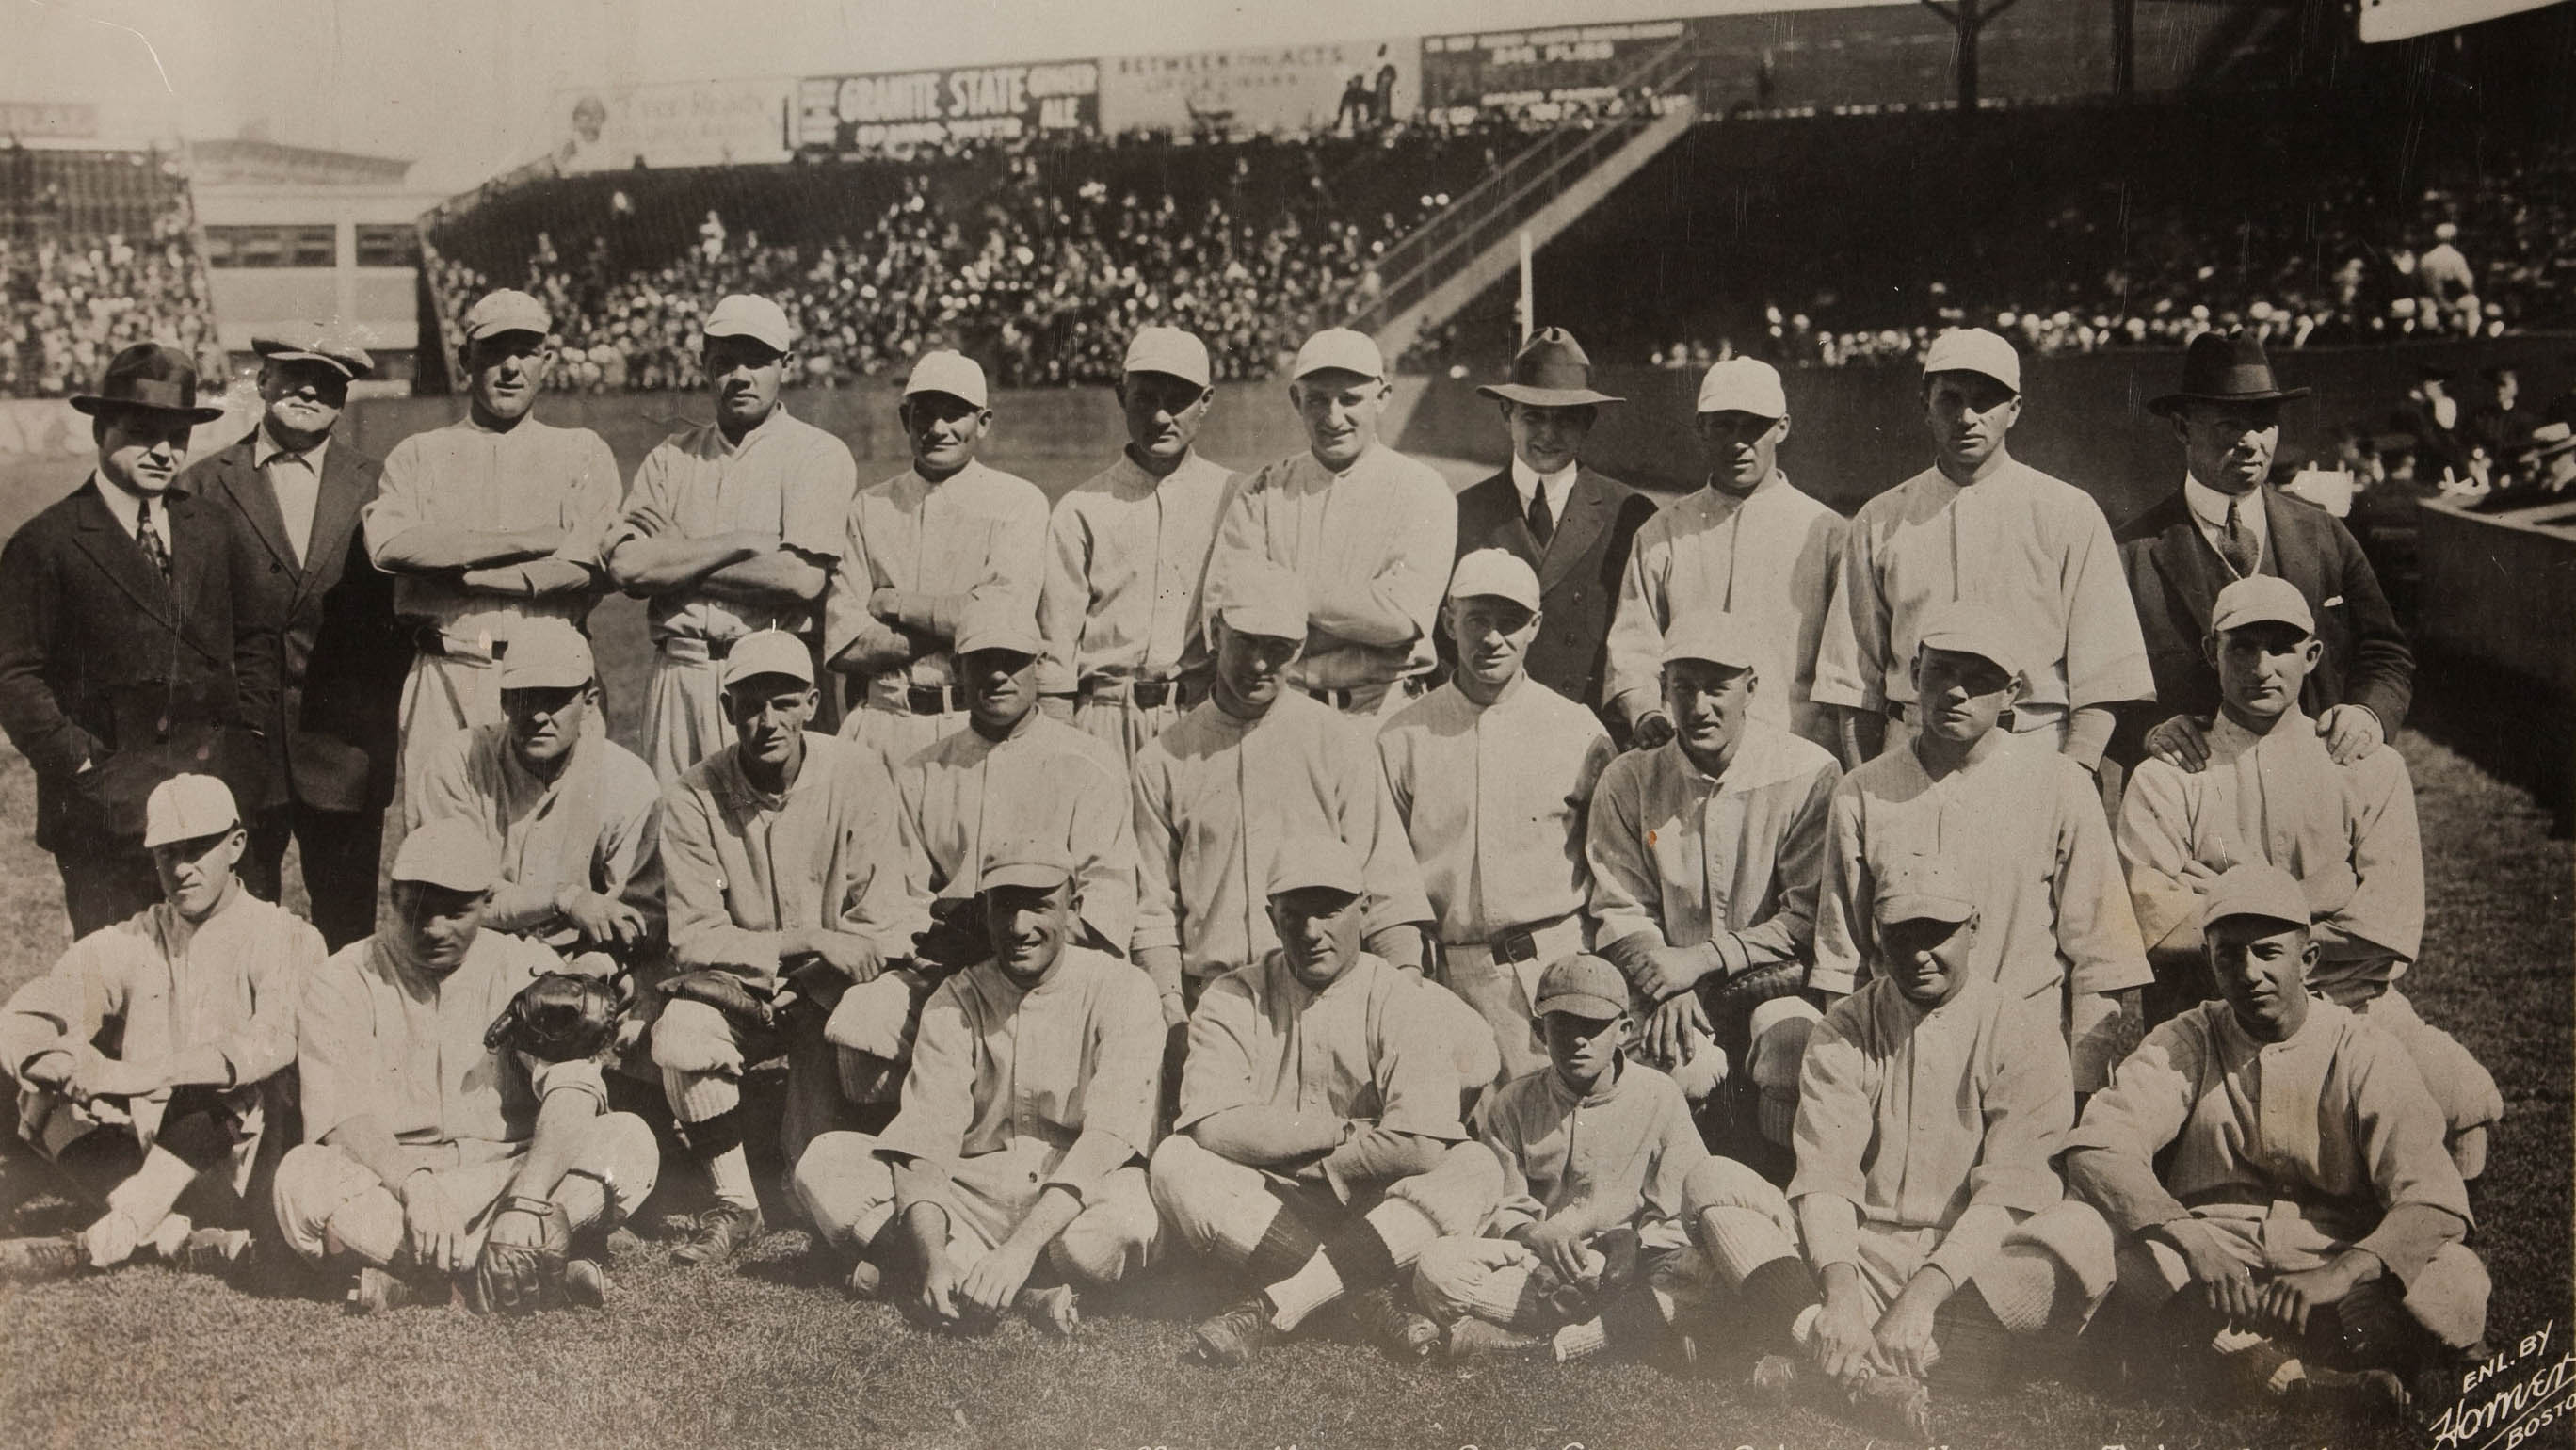 In 1918, war and a flu pandemic upended the world of sports. While the war forced the World Series between the Chicago Cubs and the Boston Red Sox, pictured, to be moved from October to September, the event itself likely helped spread the disease throughout the city of Boston, according to Johnny Smith, associate professor in the School of History and Sociology. He has co-authored a new book on the era called "War Fever"